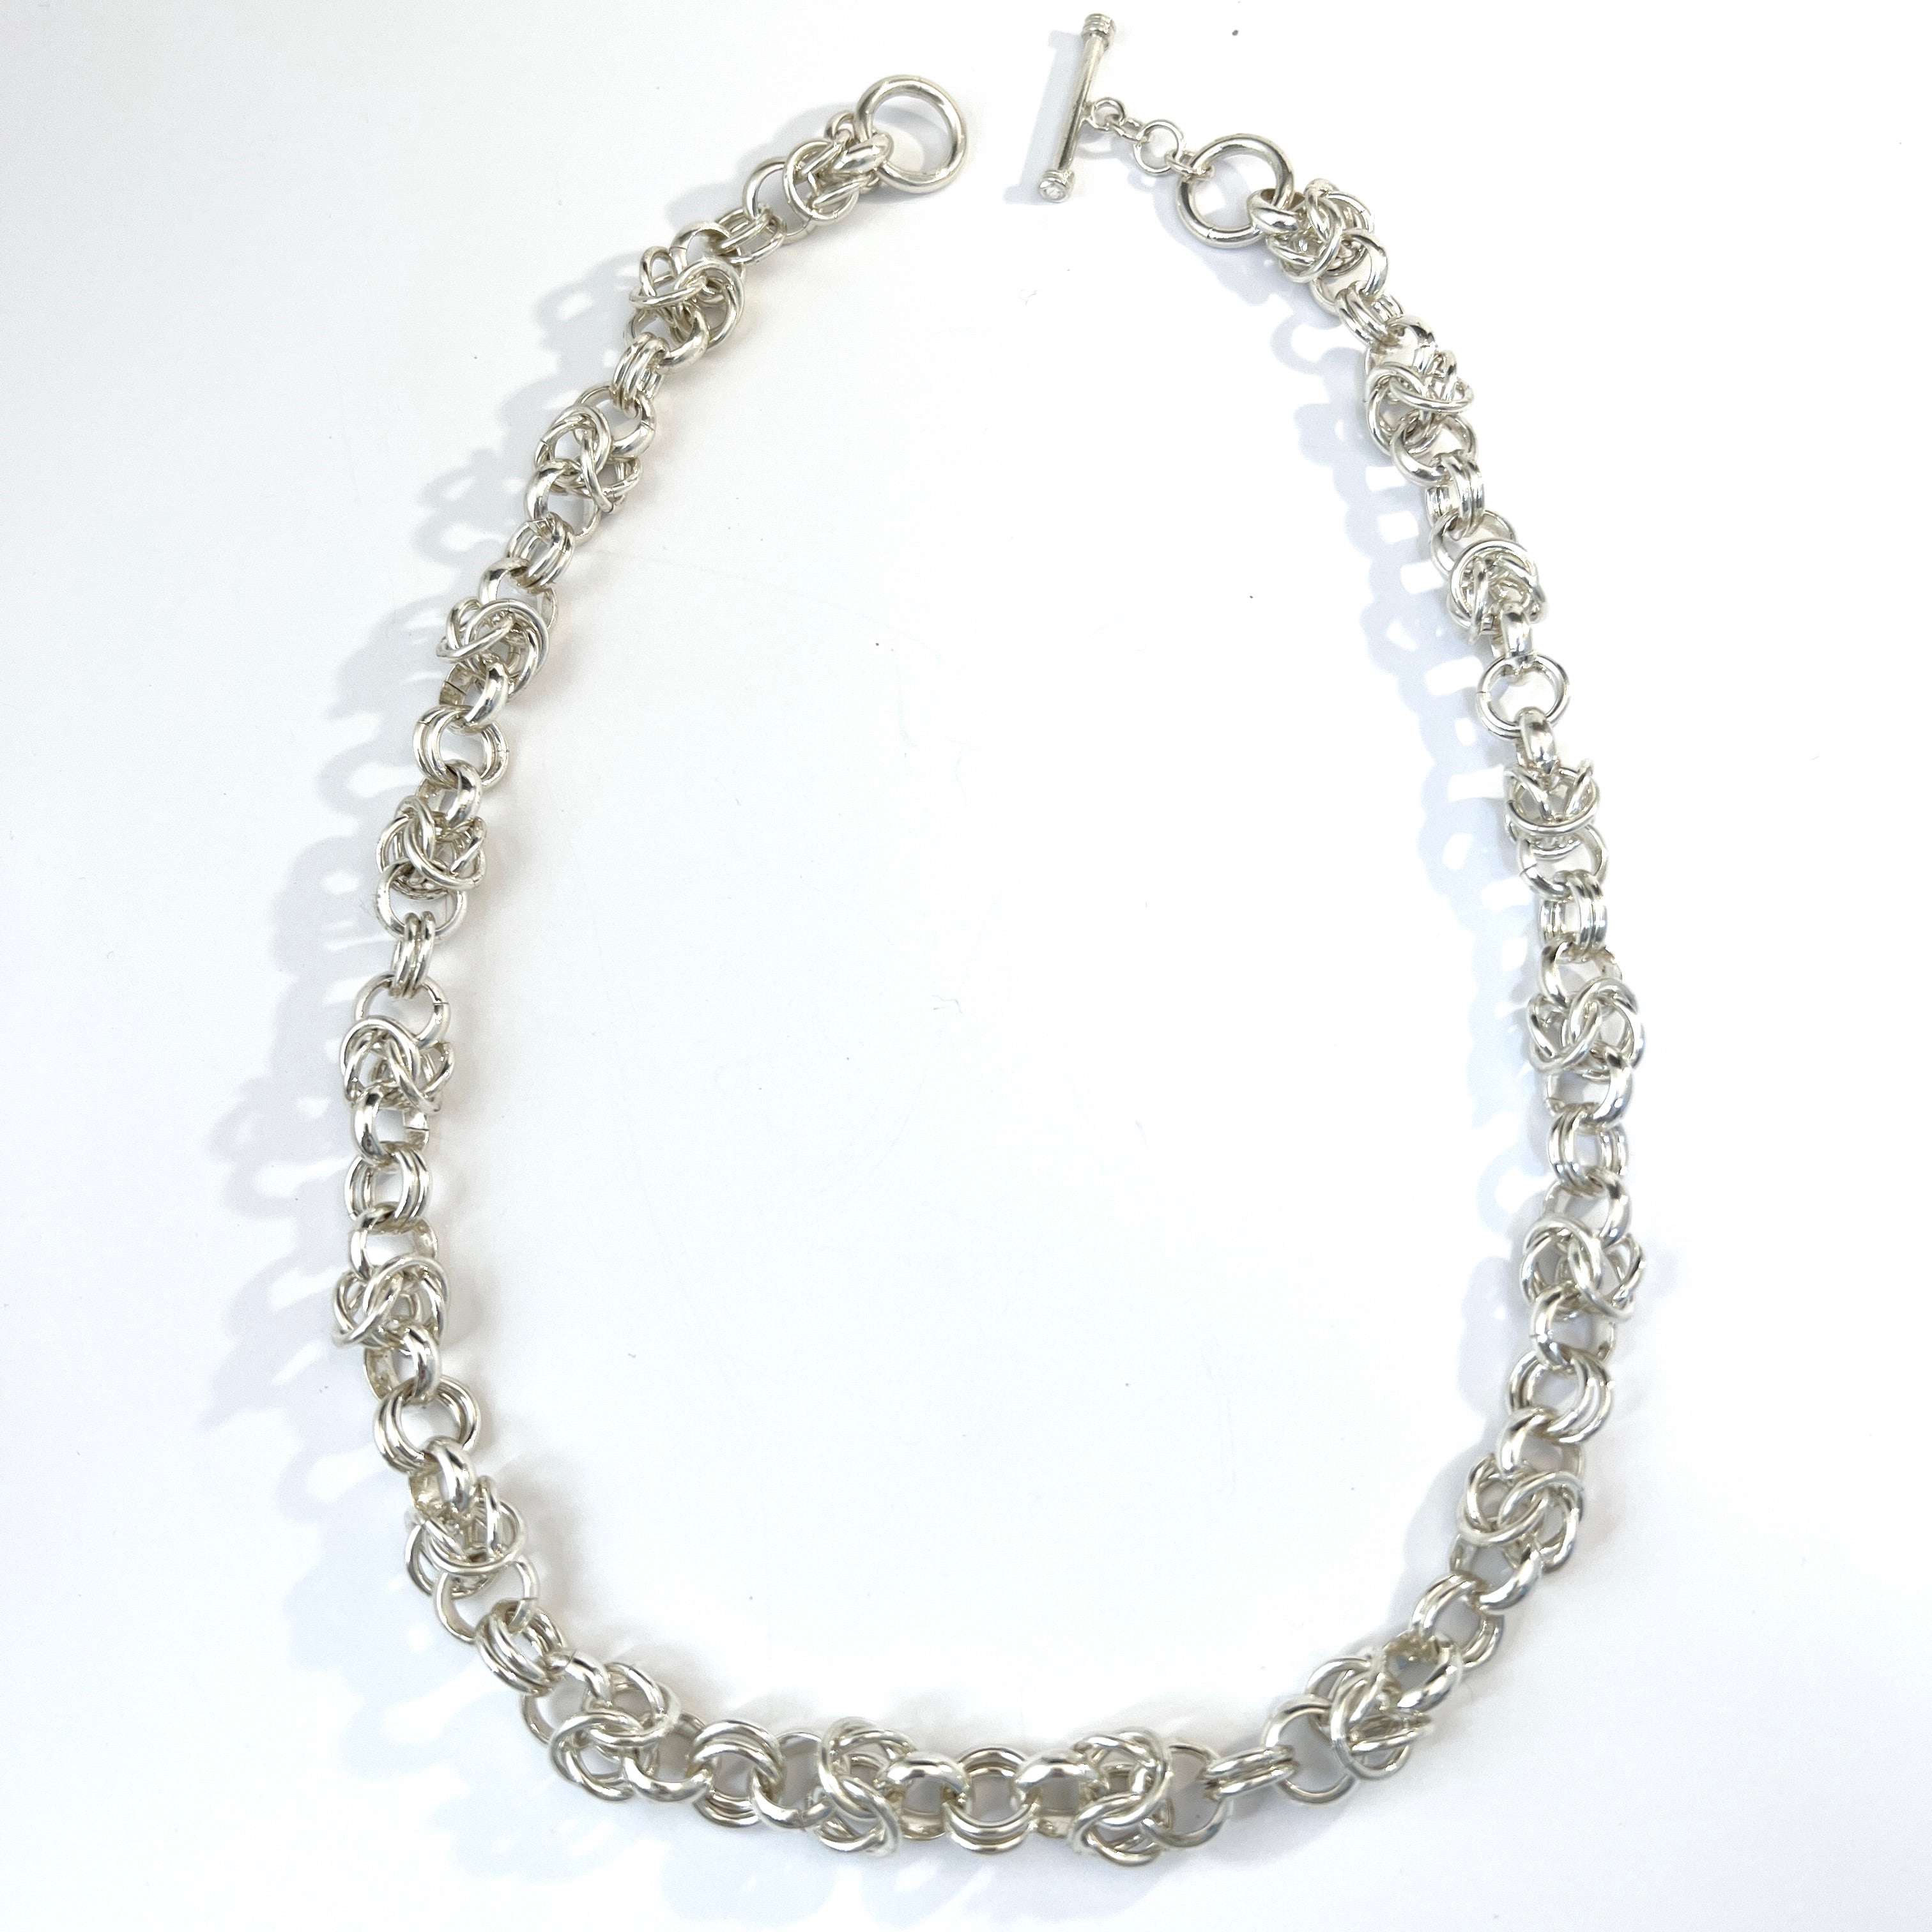 Buy Lightweight Large Chain. Chunky Chain Necklace. Extra Large Silver Curb  Chain. Aluminum Chain. 3 Extender Chain. Online in India - Etsy